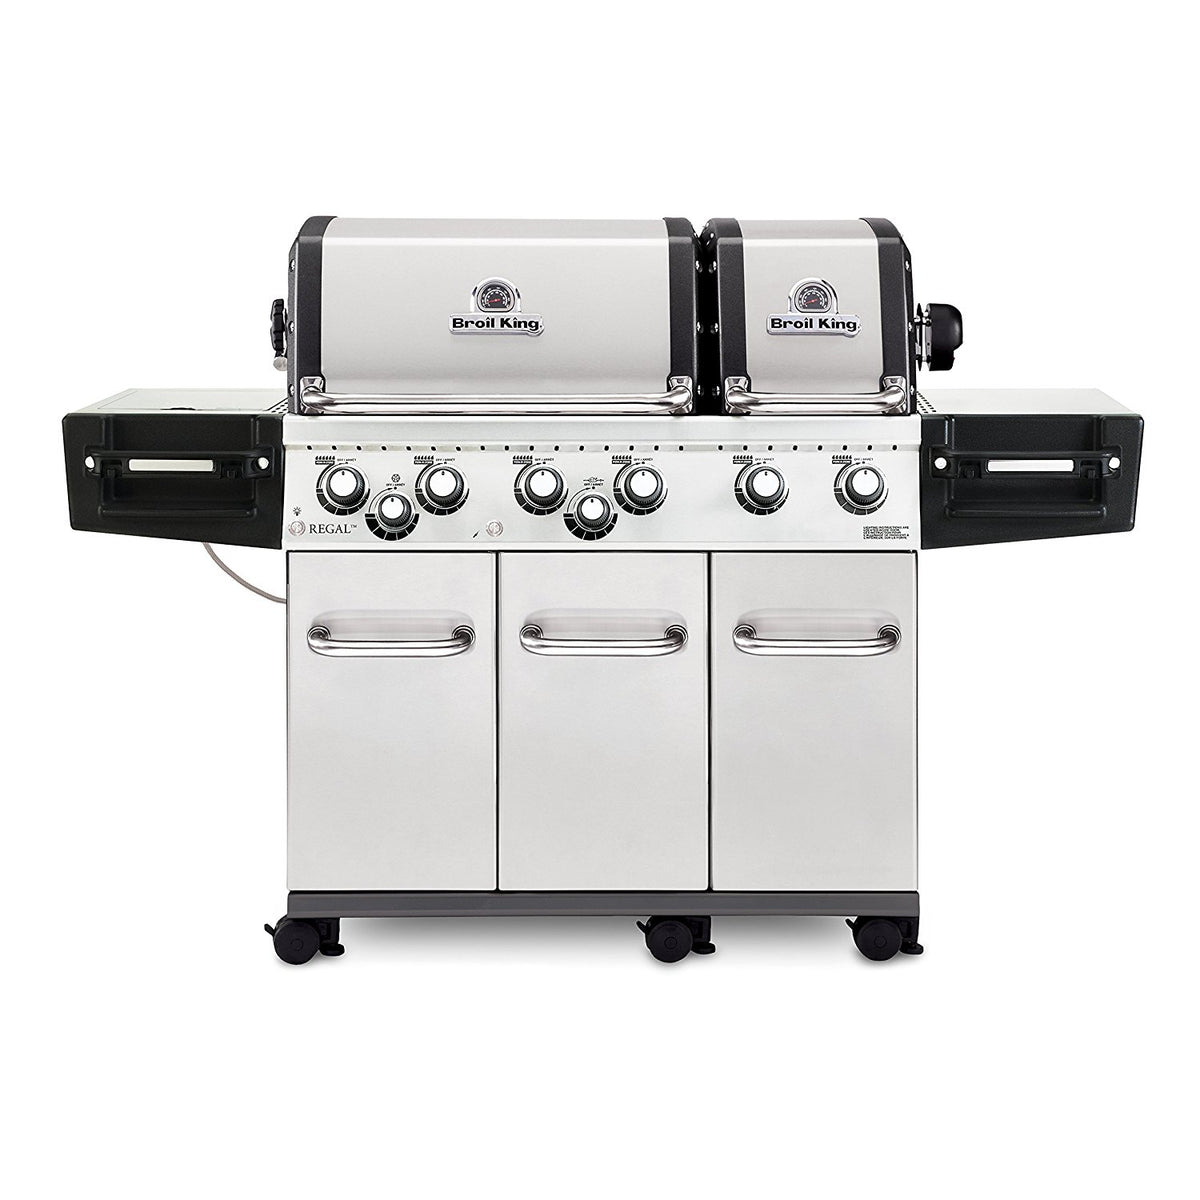 Broil King 957347 Regal XLS Pro 6 Burner - Natural Gas Grill, Stainless Steel